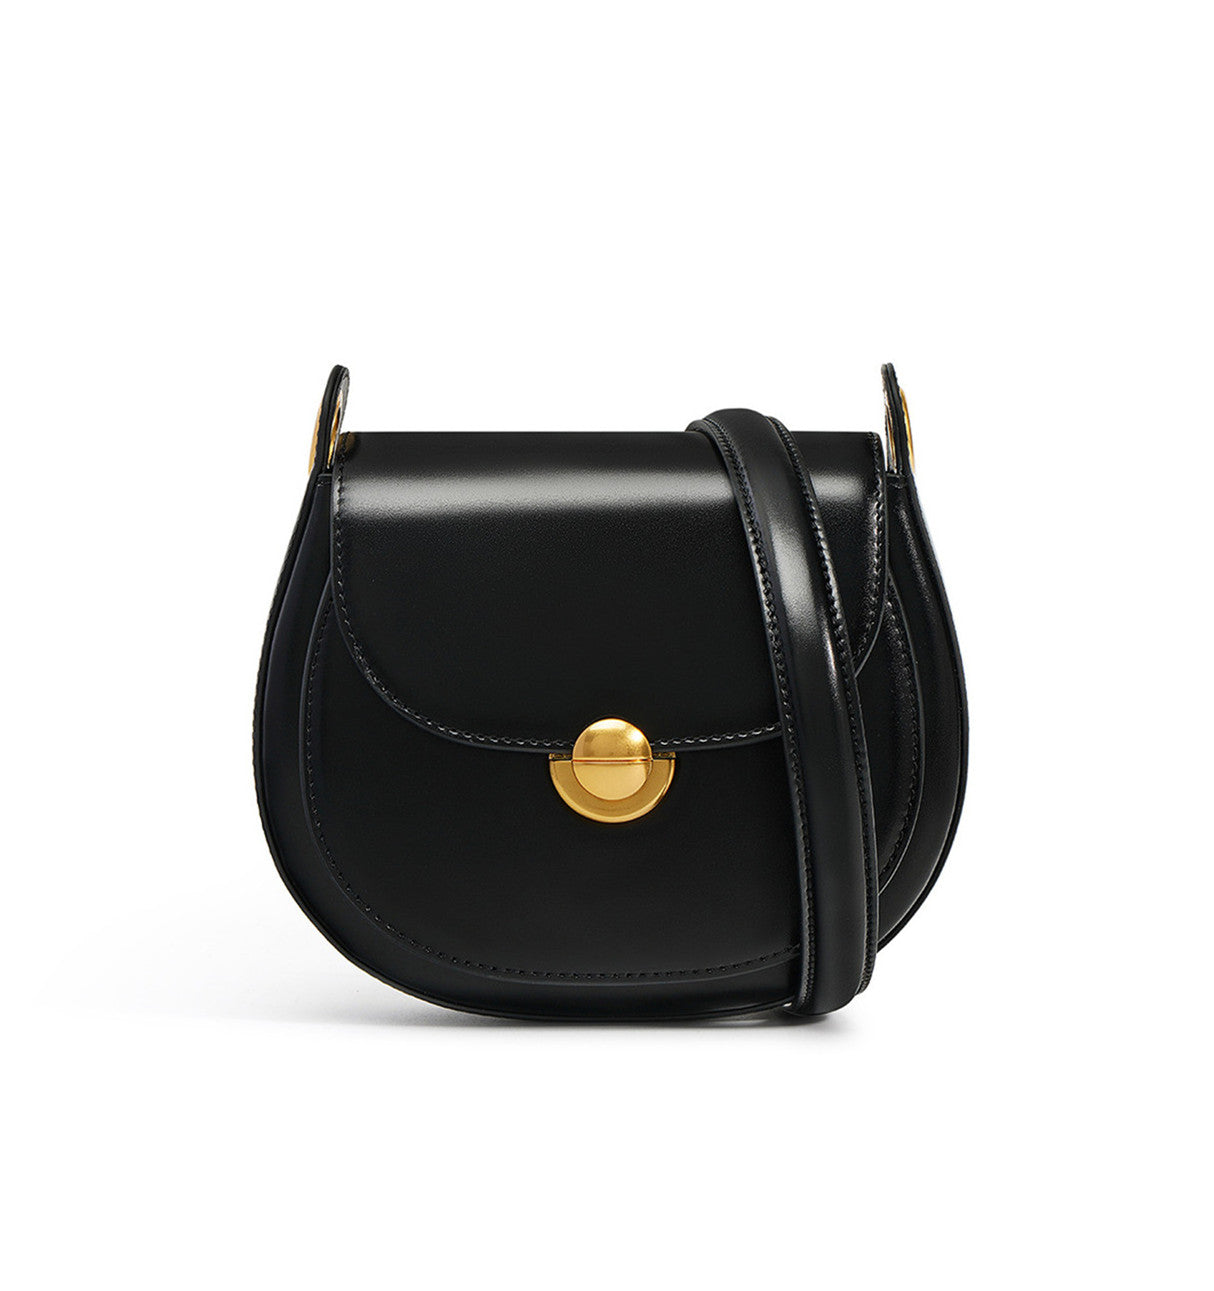 Classic Equestrian-inspired Leather Satchel for Women's Wardrobe woyaza